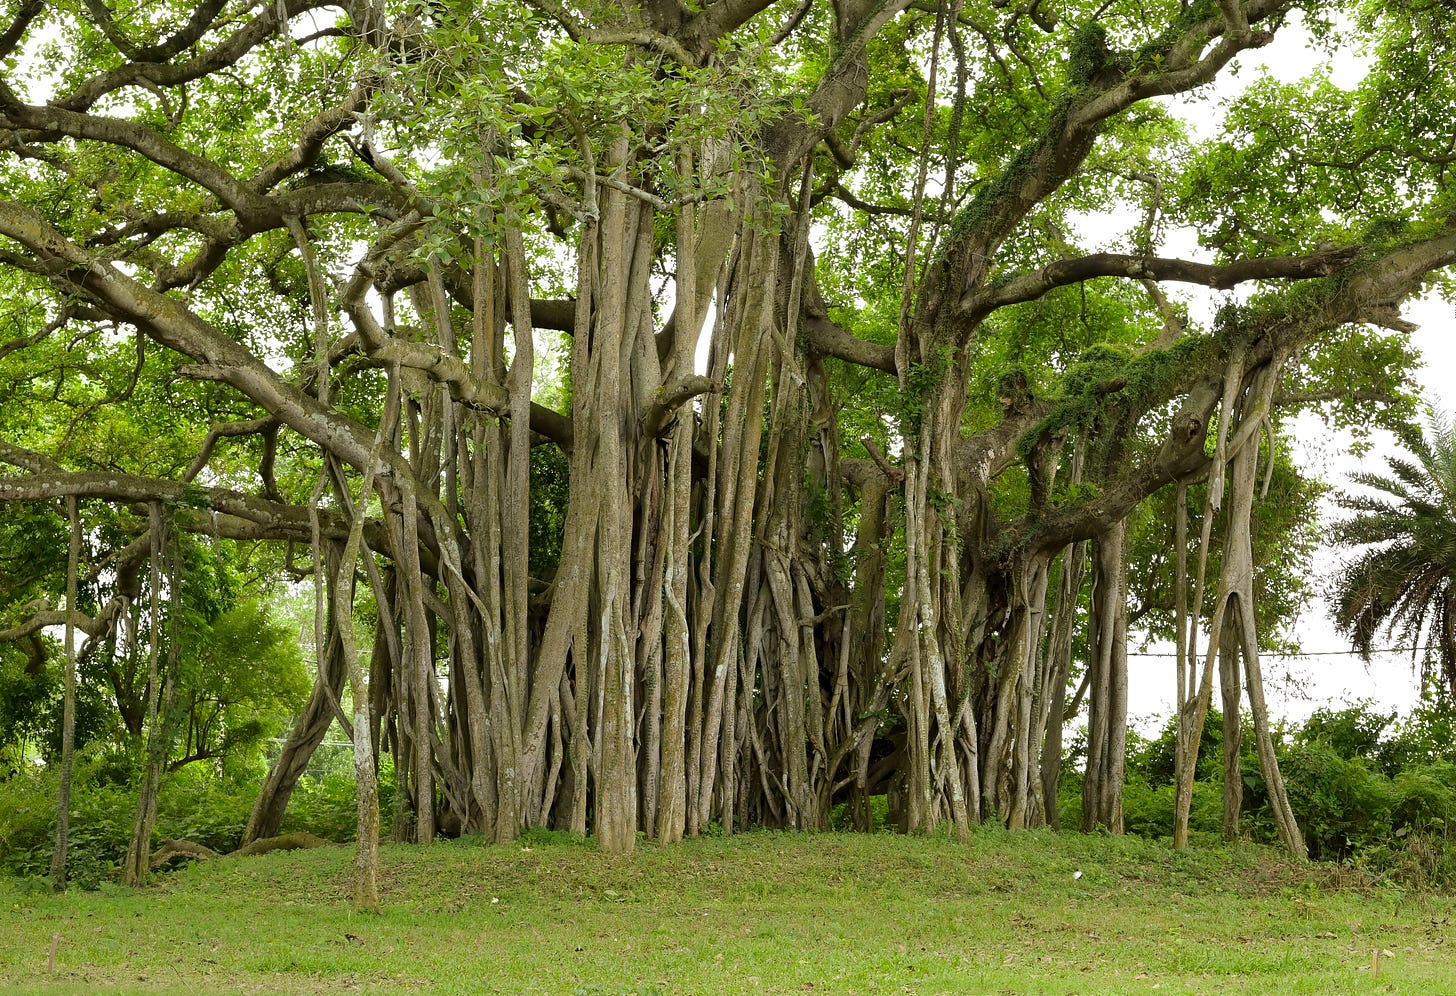 A banyan tree with tens of roots